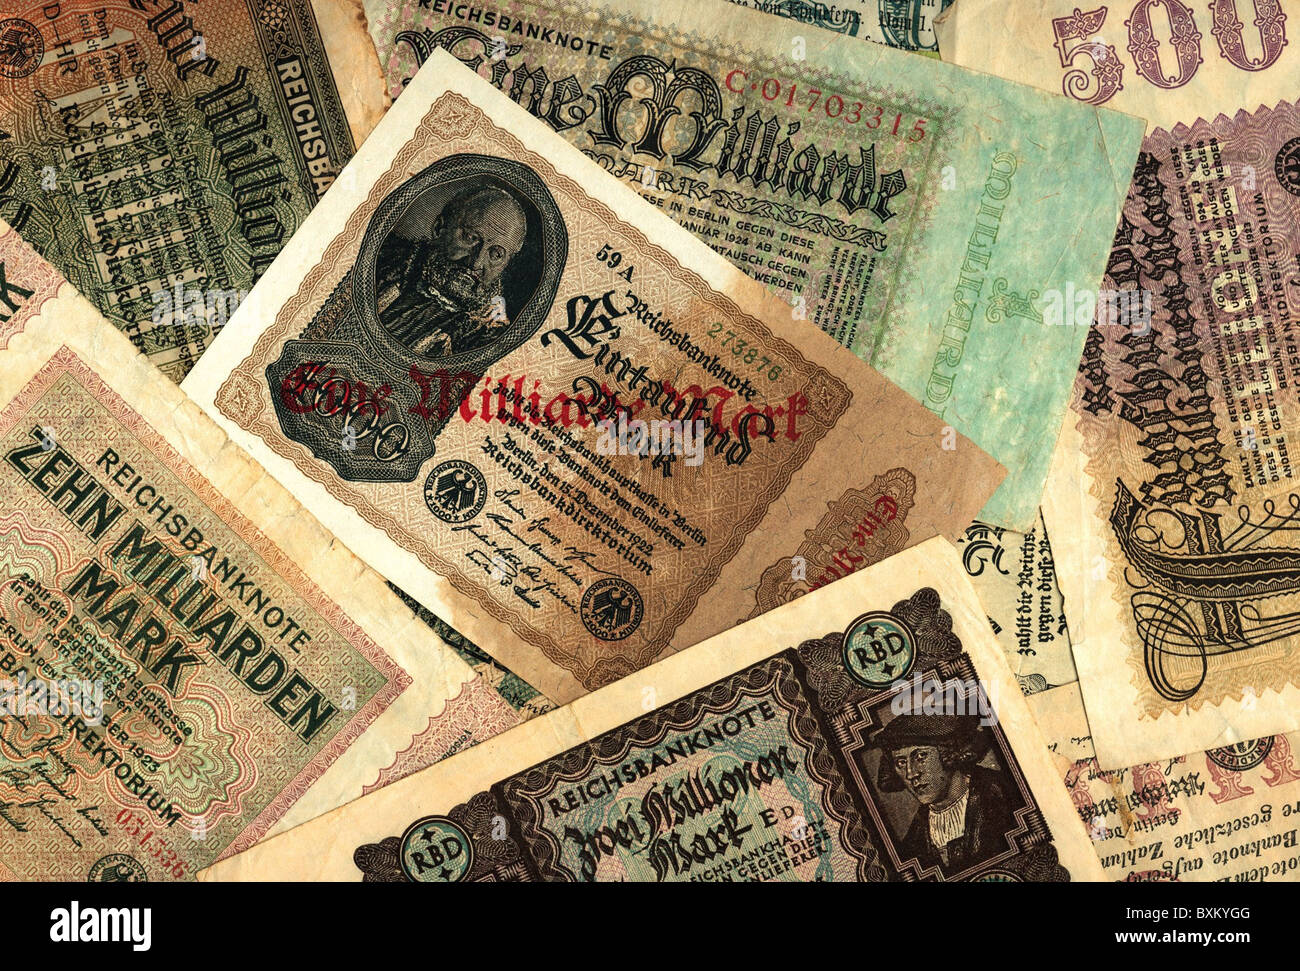 money / finance, inflation money, Germany, bank notes, 1922 / 1923, Additional-Rights-Clearences-Not Available Stock Photo